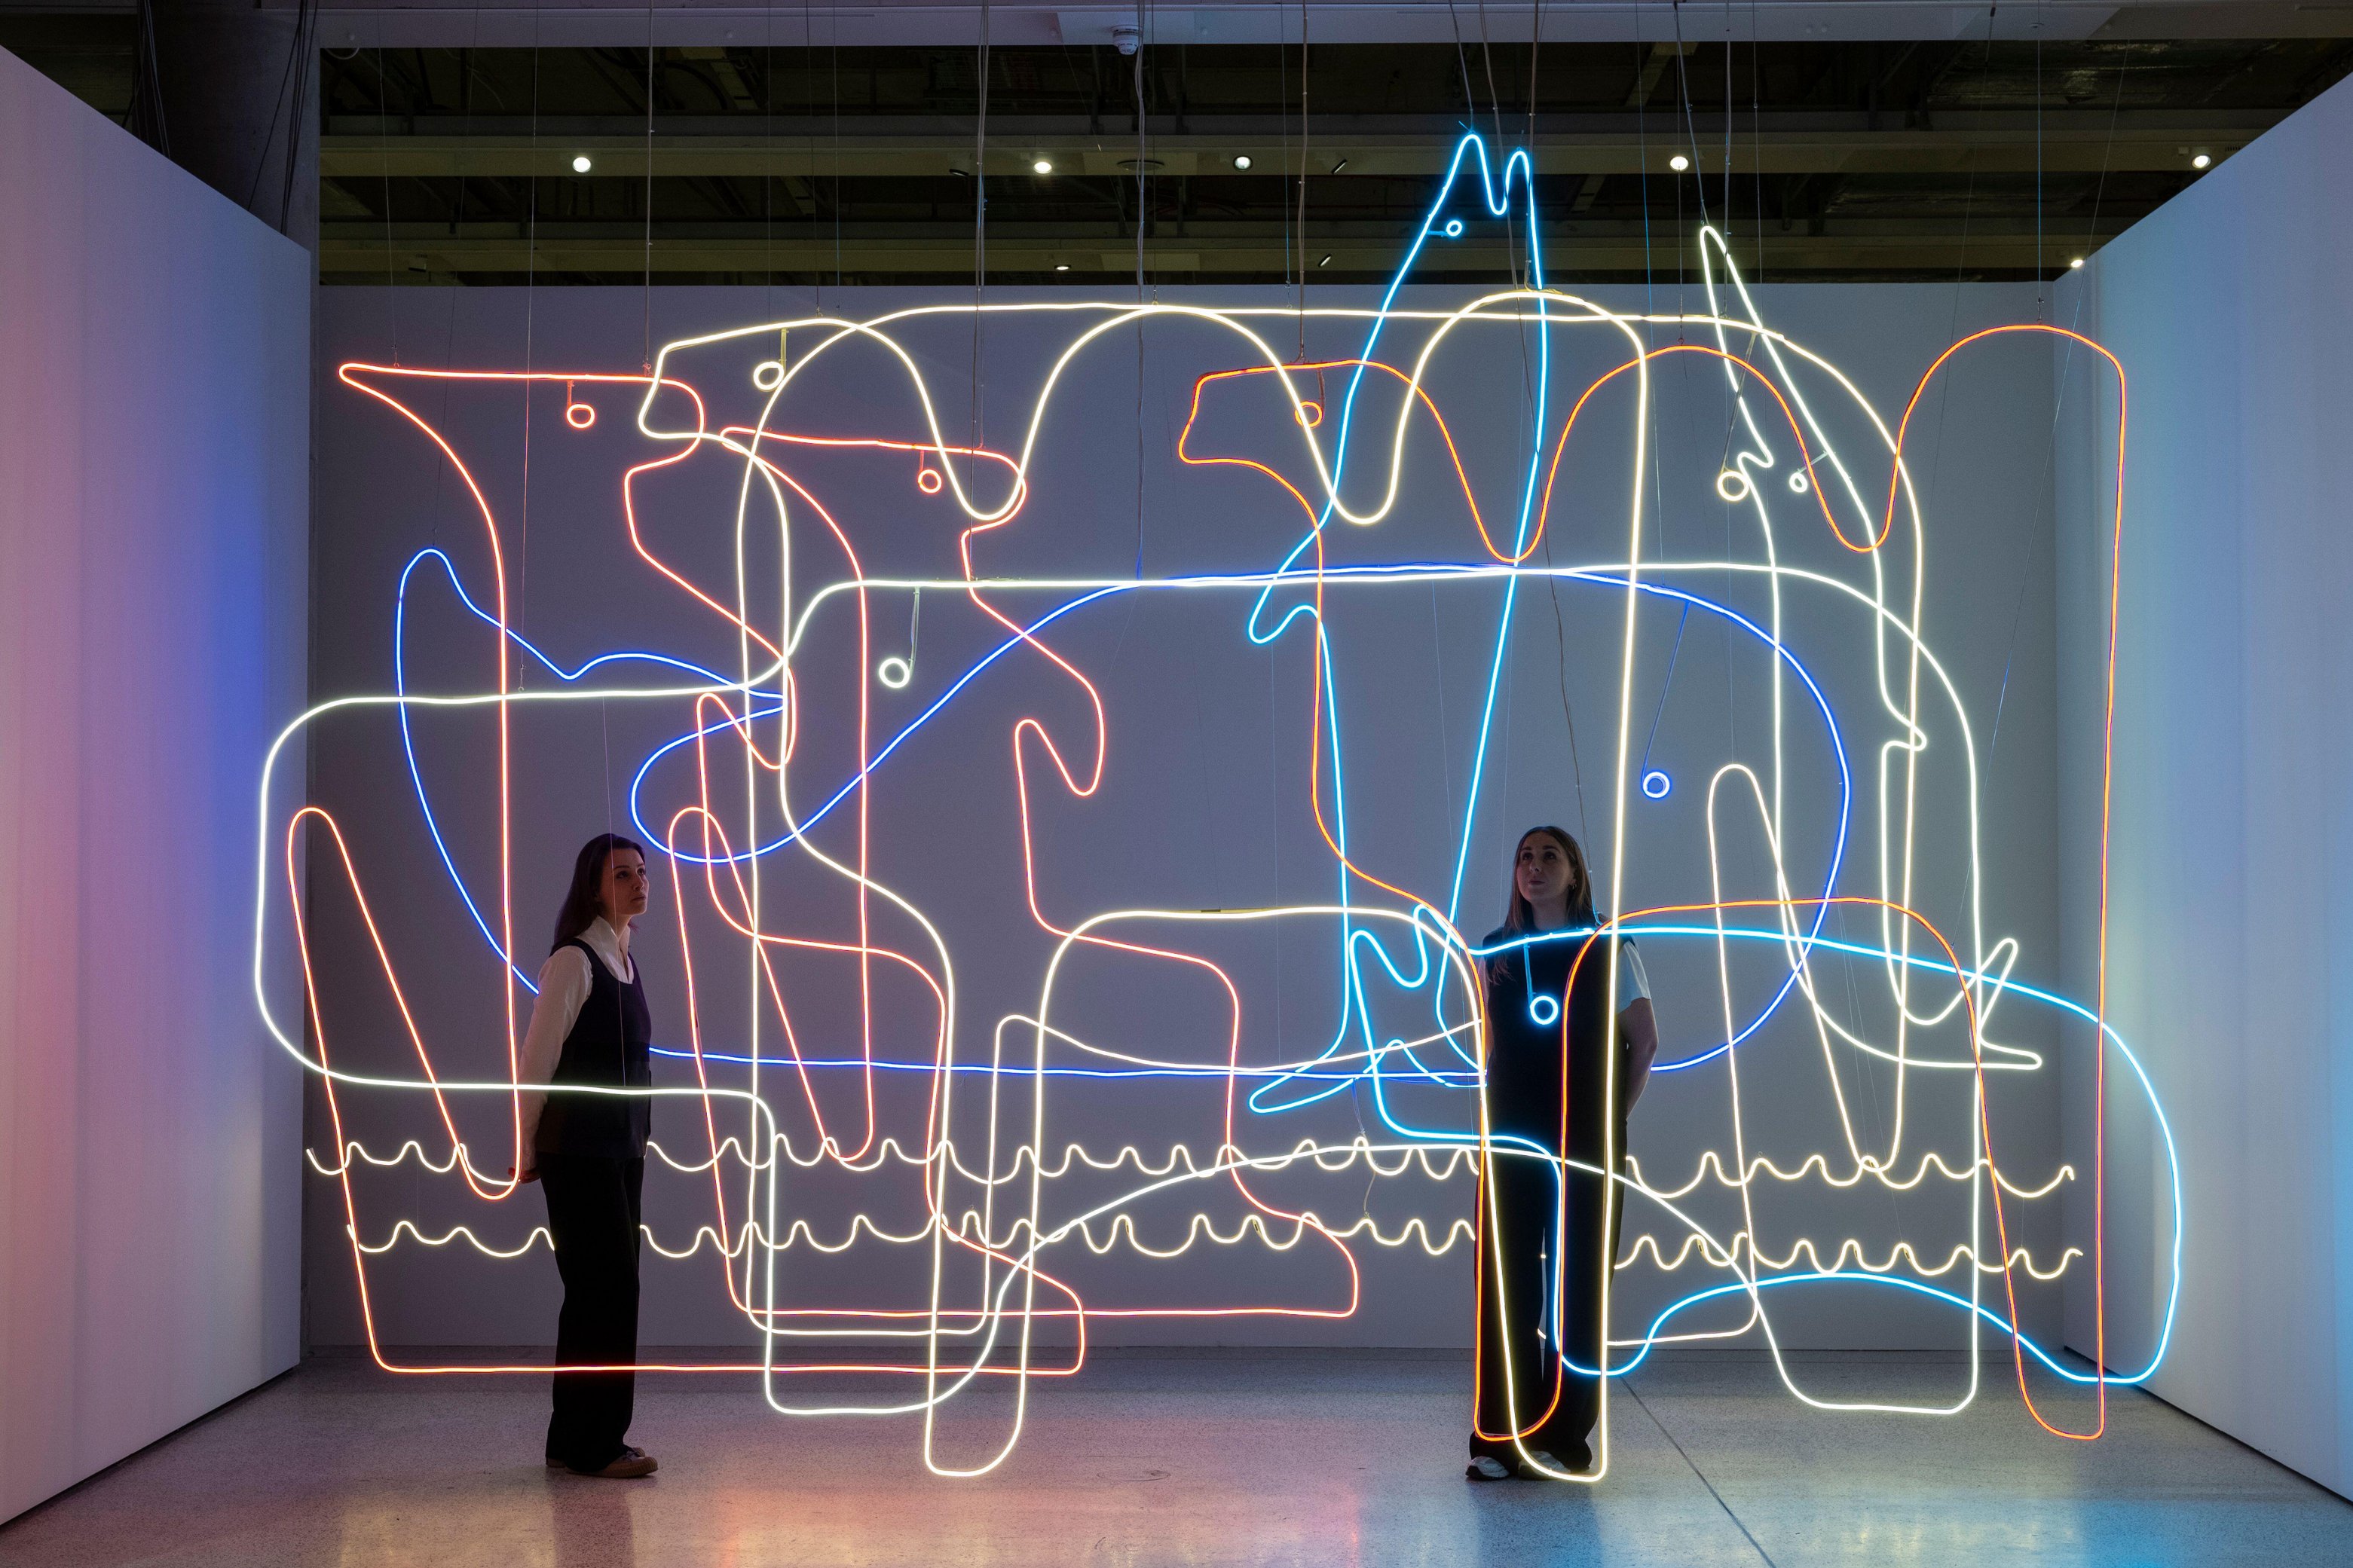 Lo Zoo by Nanda Vigo is an LED installation reinterpreting Enzo Mari’s 16 Animals and 16 Fish puzzles. It forms part of a Mari retrospective at the Design Museum, Kensington, until September 8. The artists and designer died of Covid in 2020, aged 88